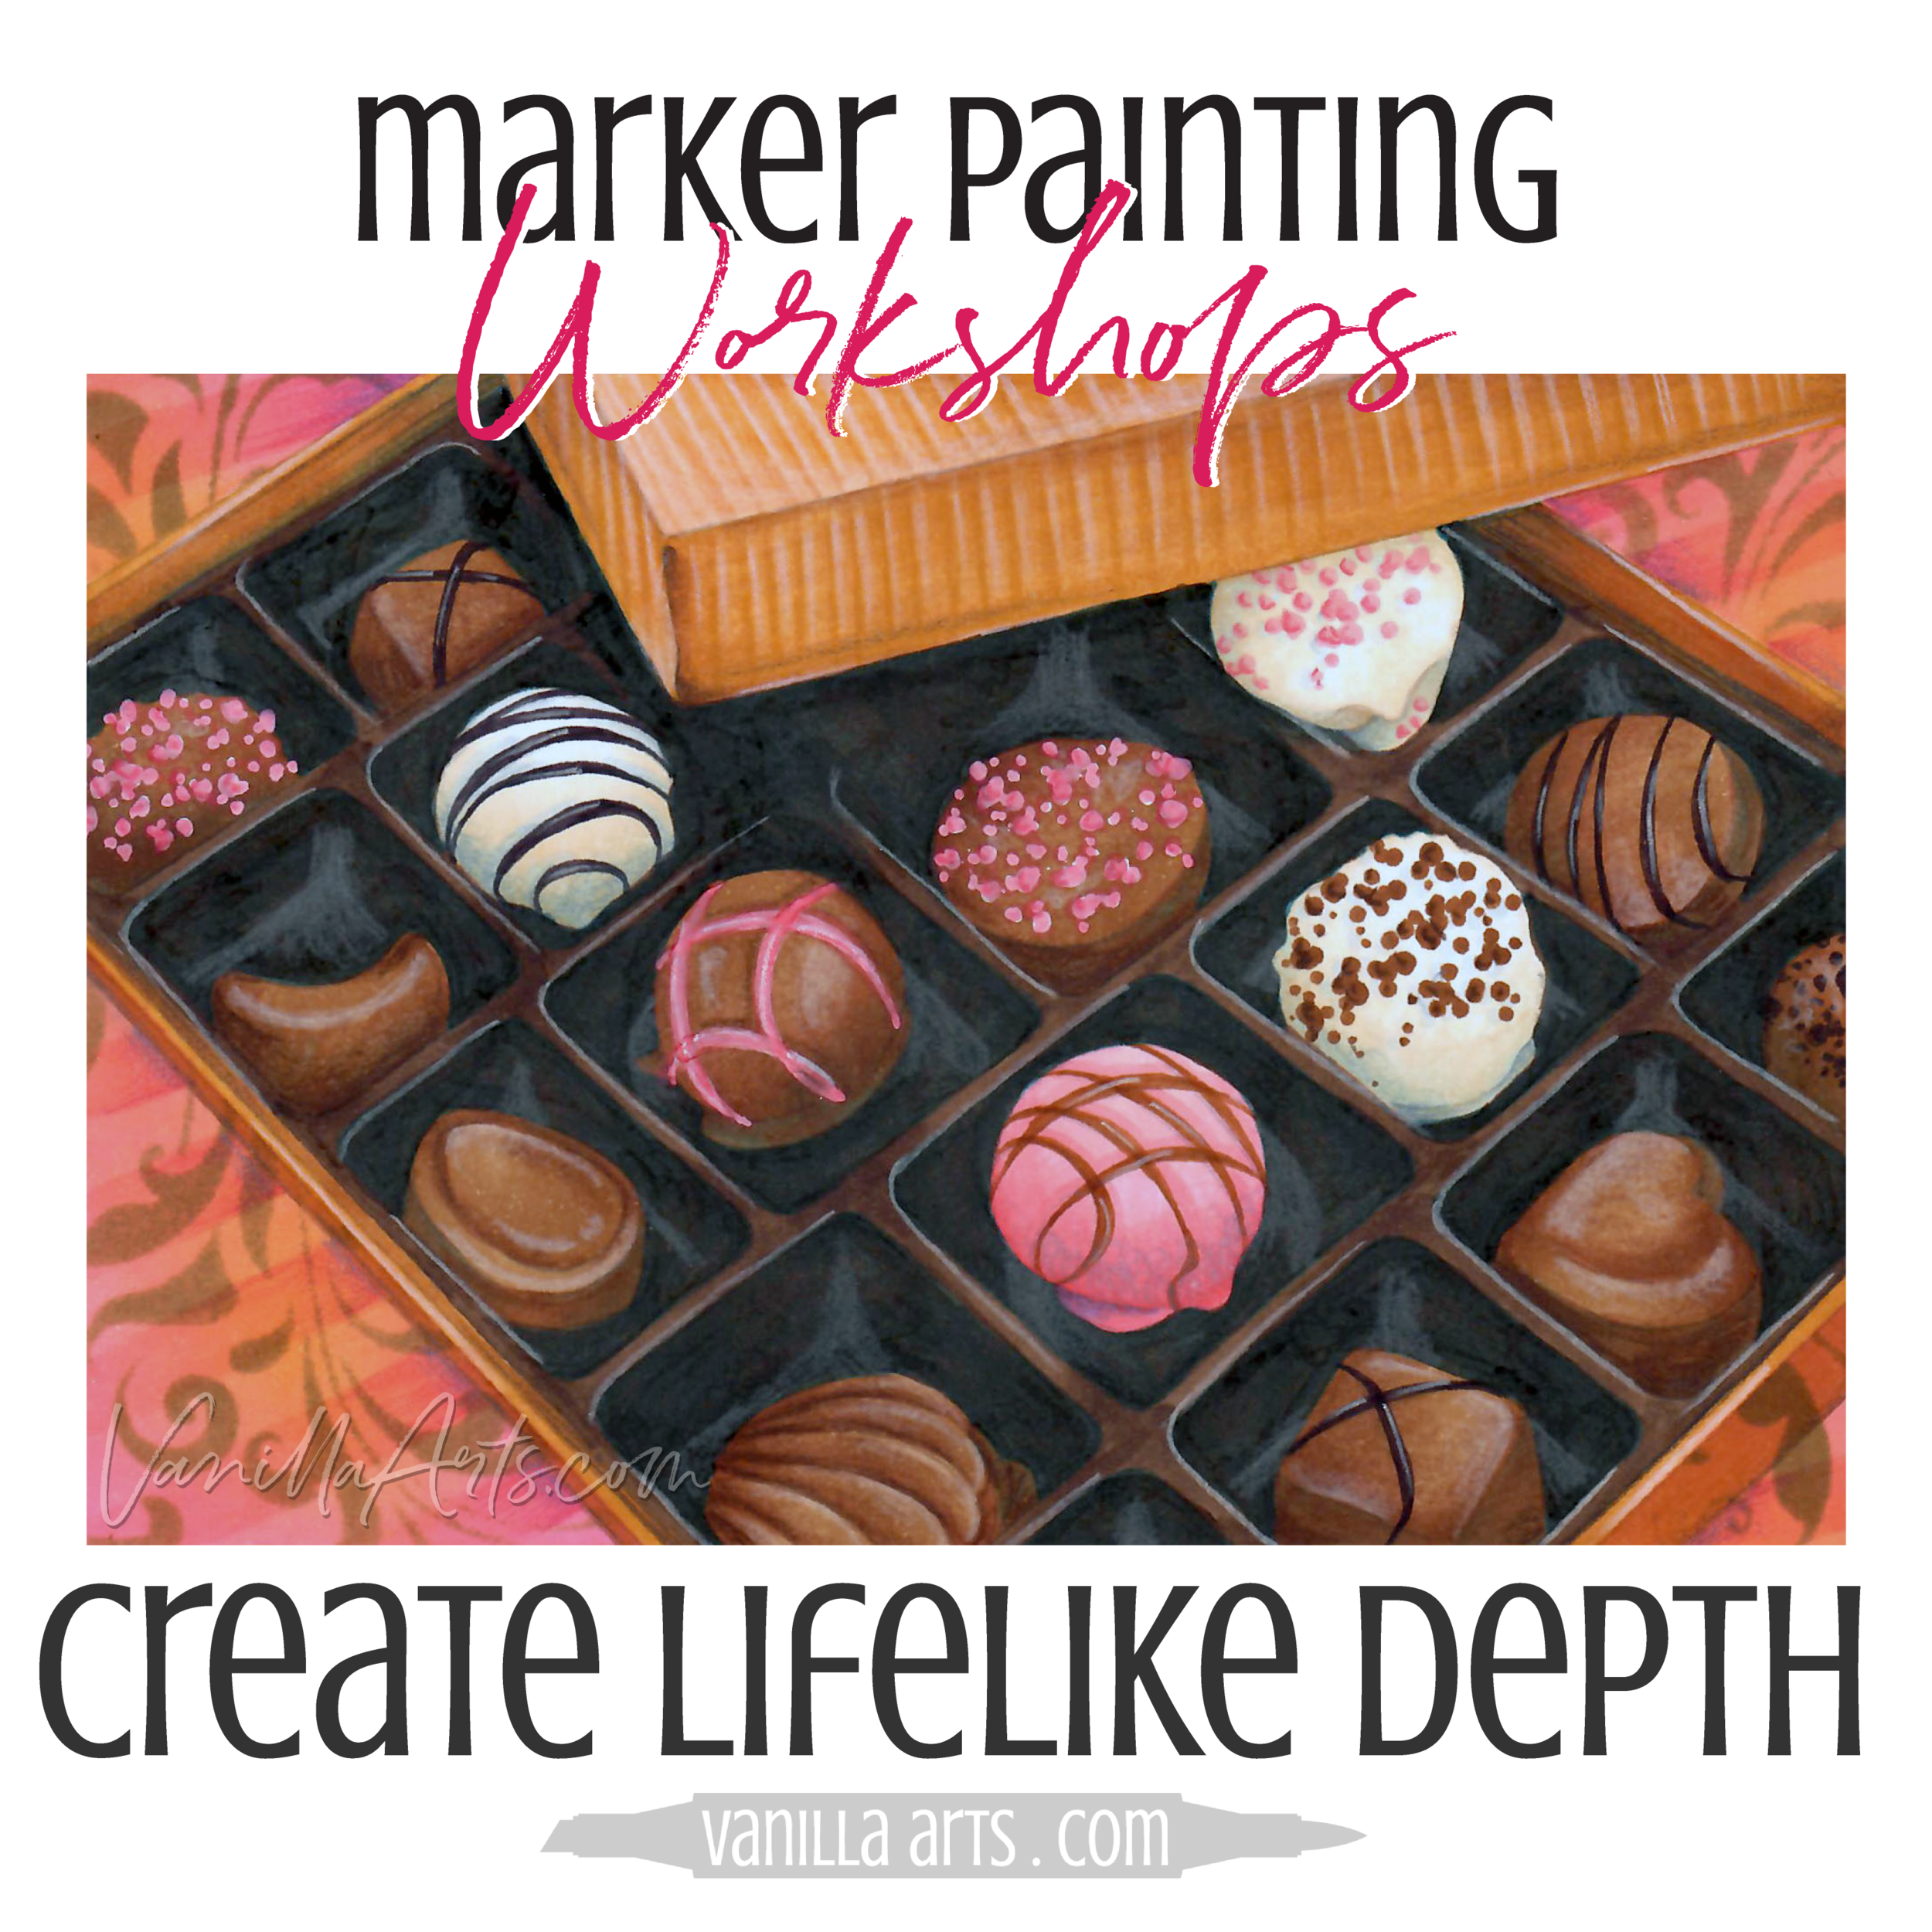 acrylic markers Archives - Chocolate Musings